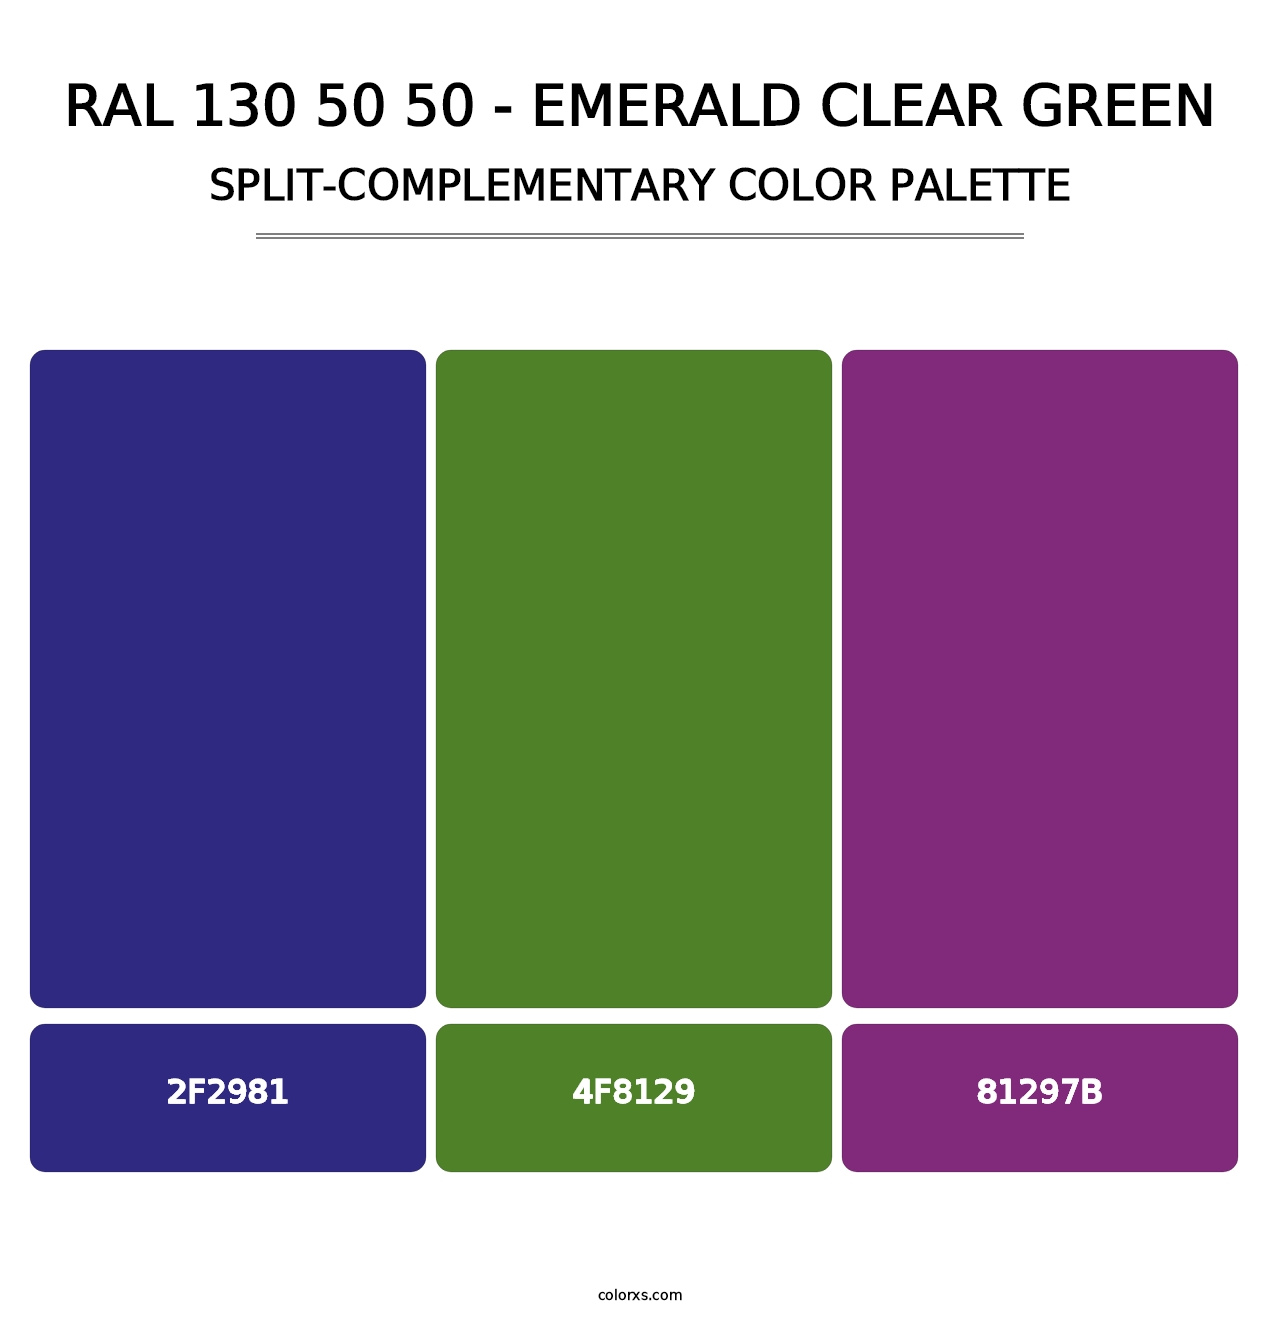 RAL 130 50 50 - Emerald Clear Green - Split-Complementary Color Palette